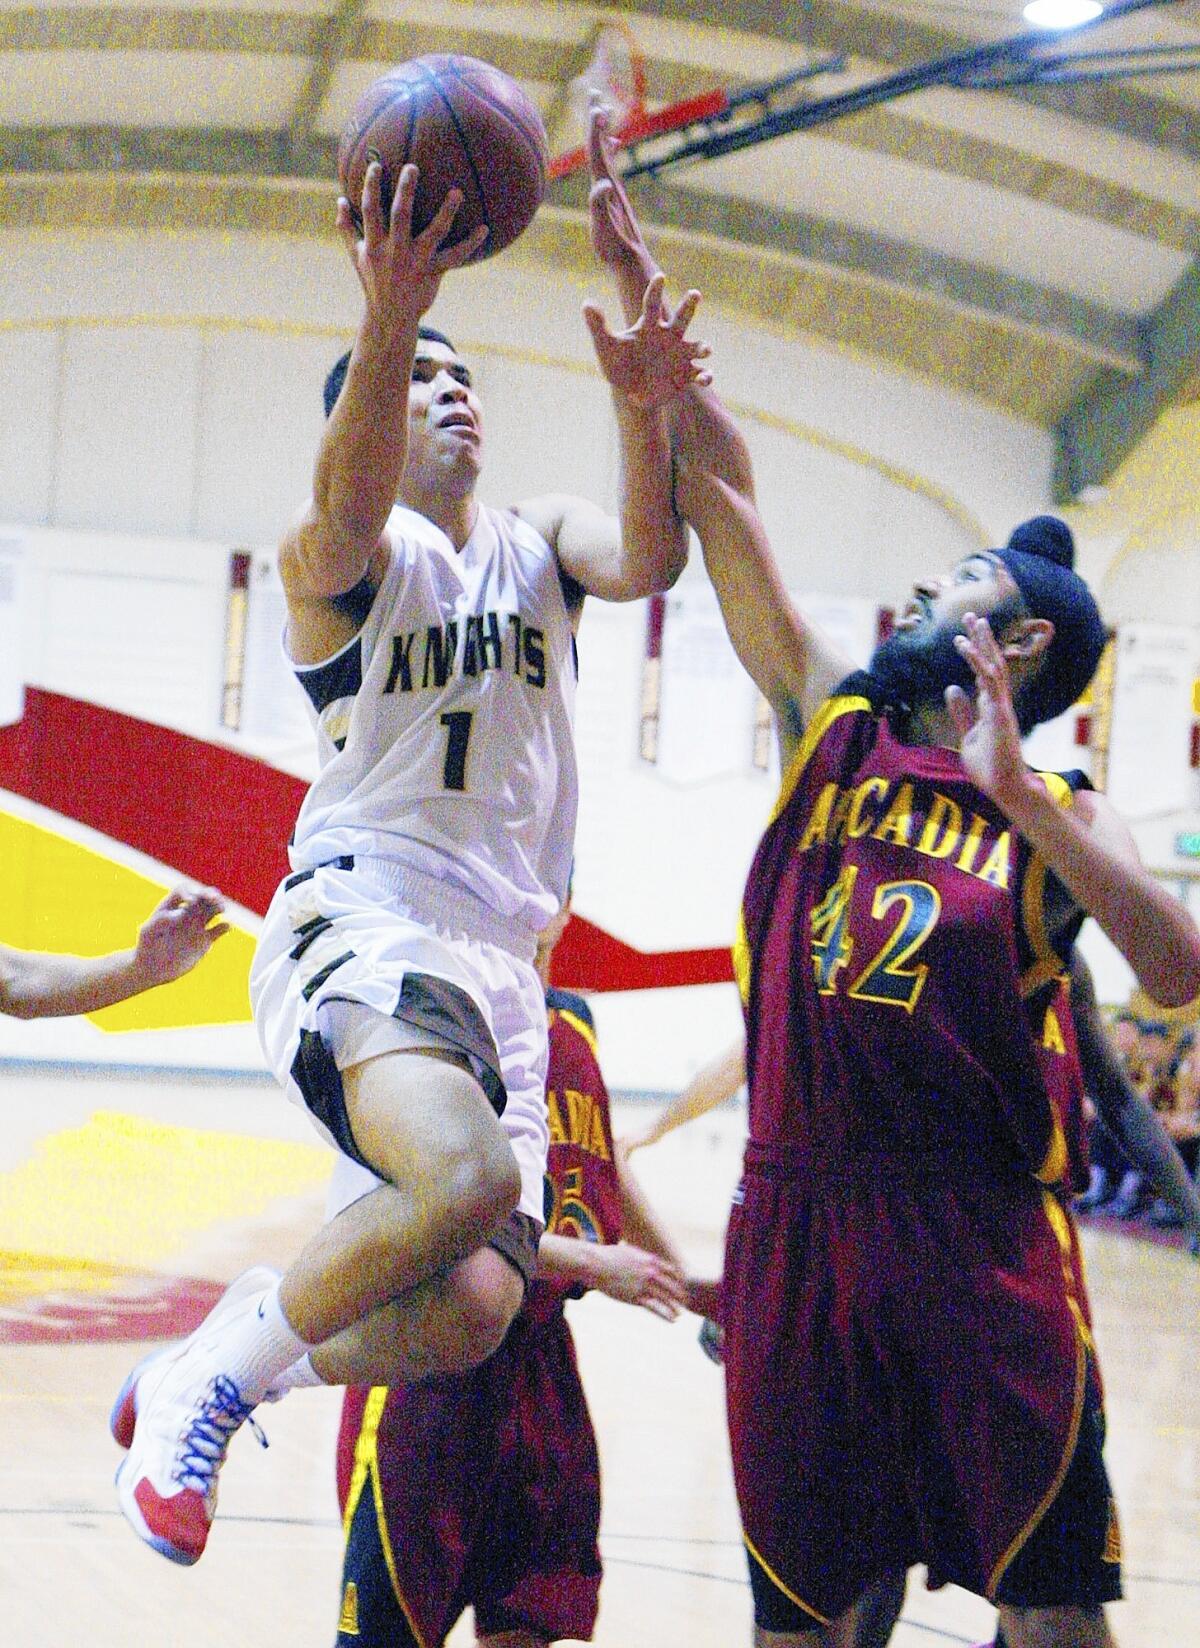 File Photo: St. Francis' Evan Crawford drives the lane to make a layup against Arcadia's Gagan Tut in the La Cañada Holiday Classic boys basketball tournament at La Cañada High School on Tuesday, Dec. 17, 2013.